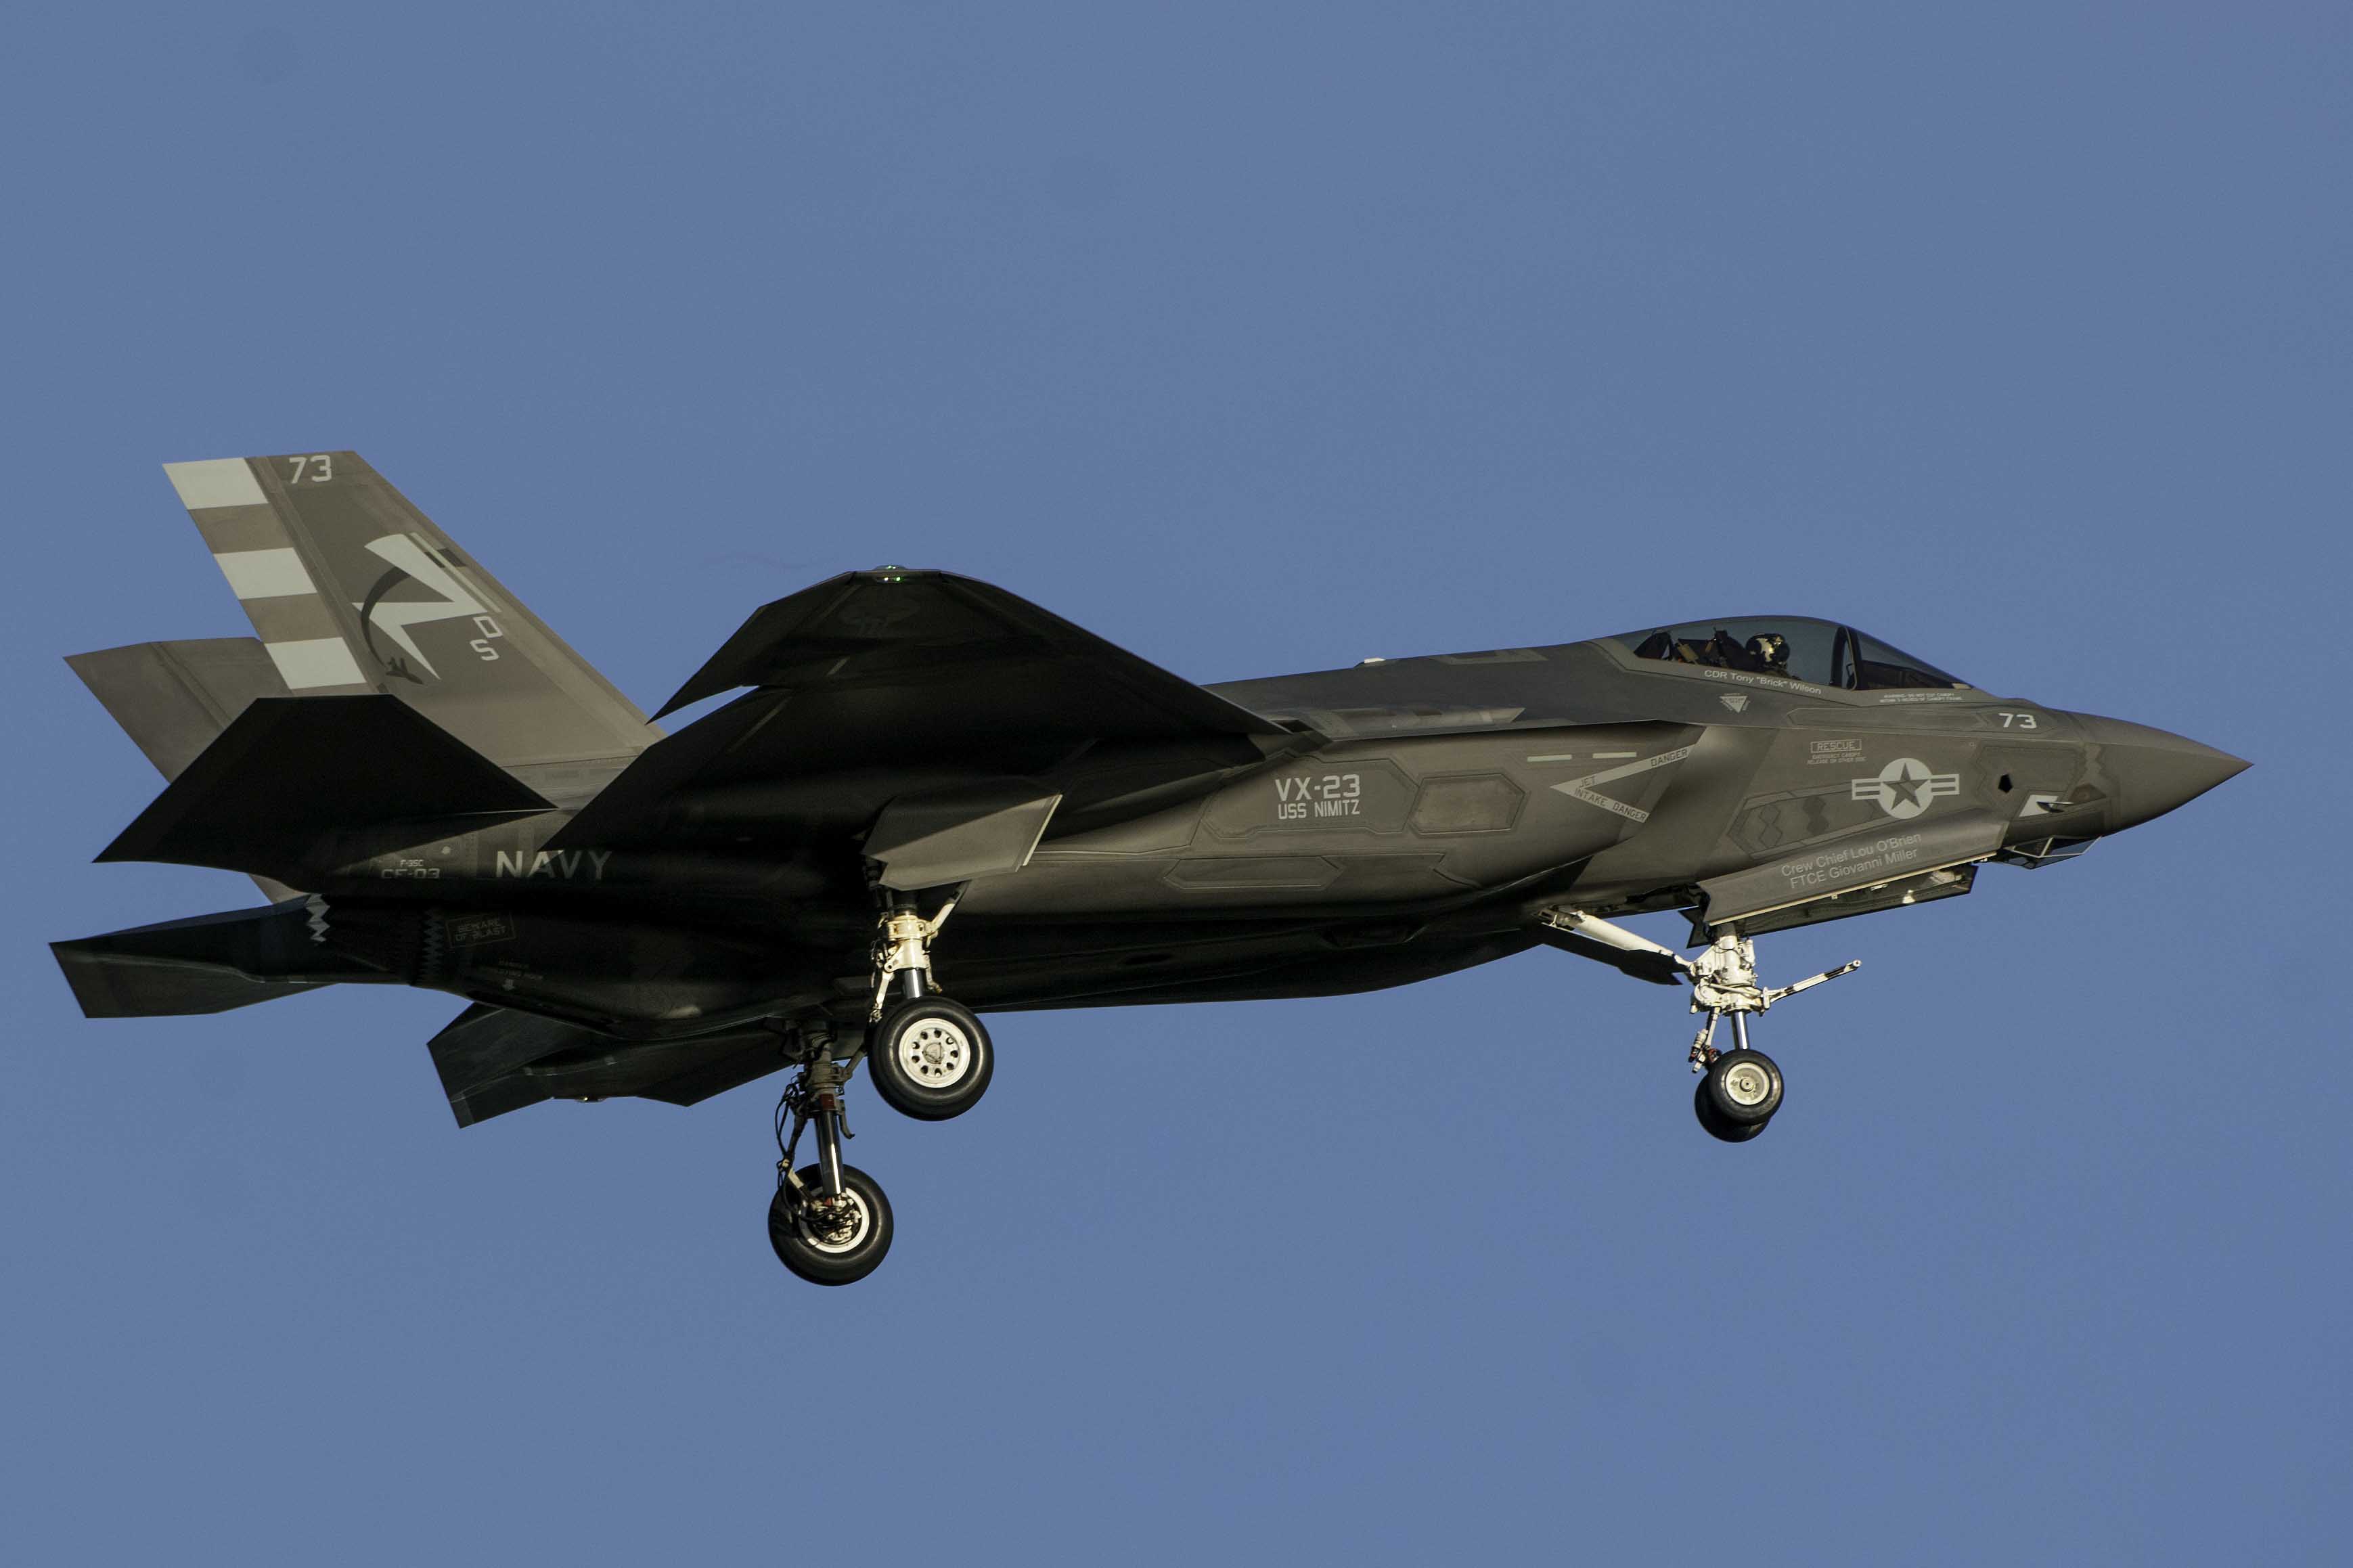 View Topic Vx 23 F 35s F 35 Spotting Photography